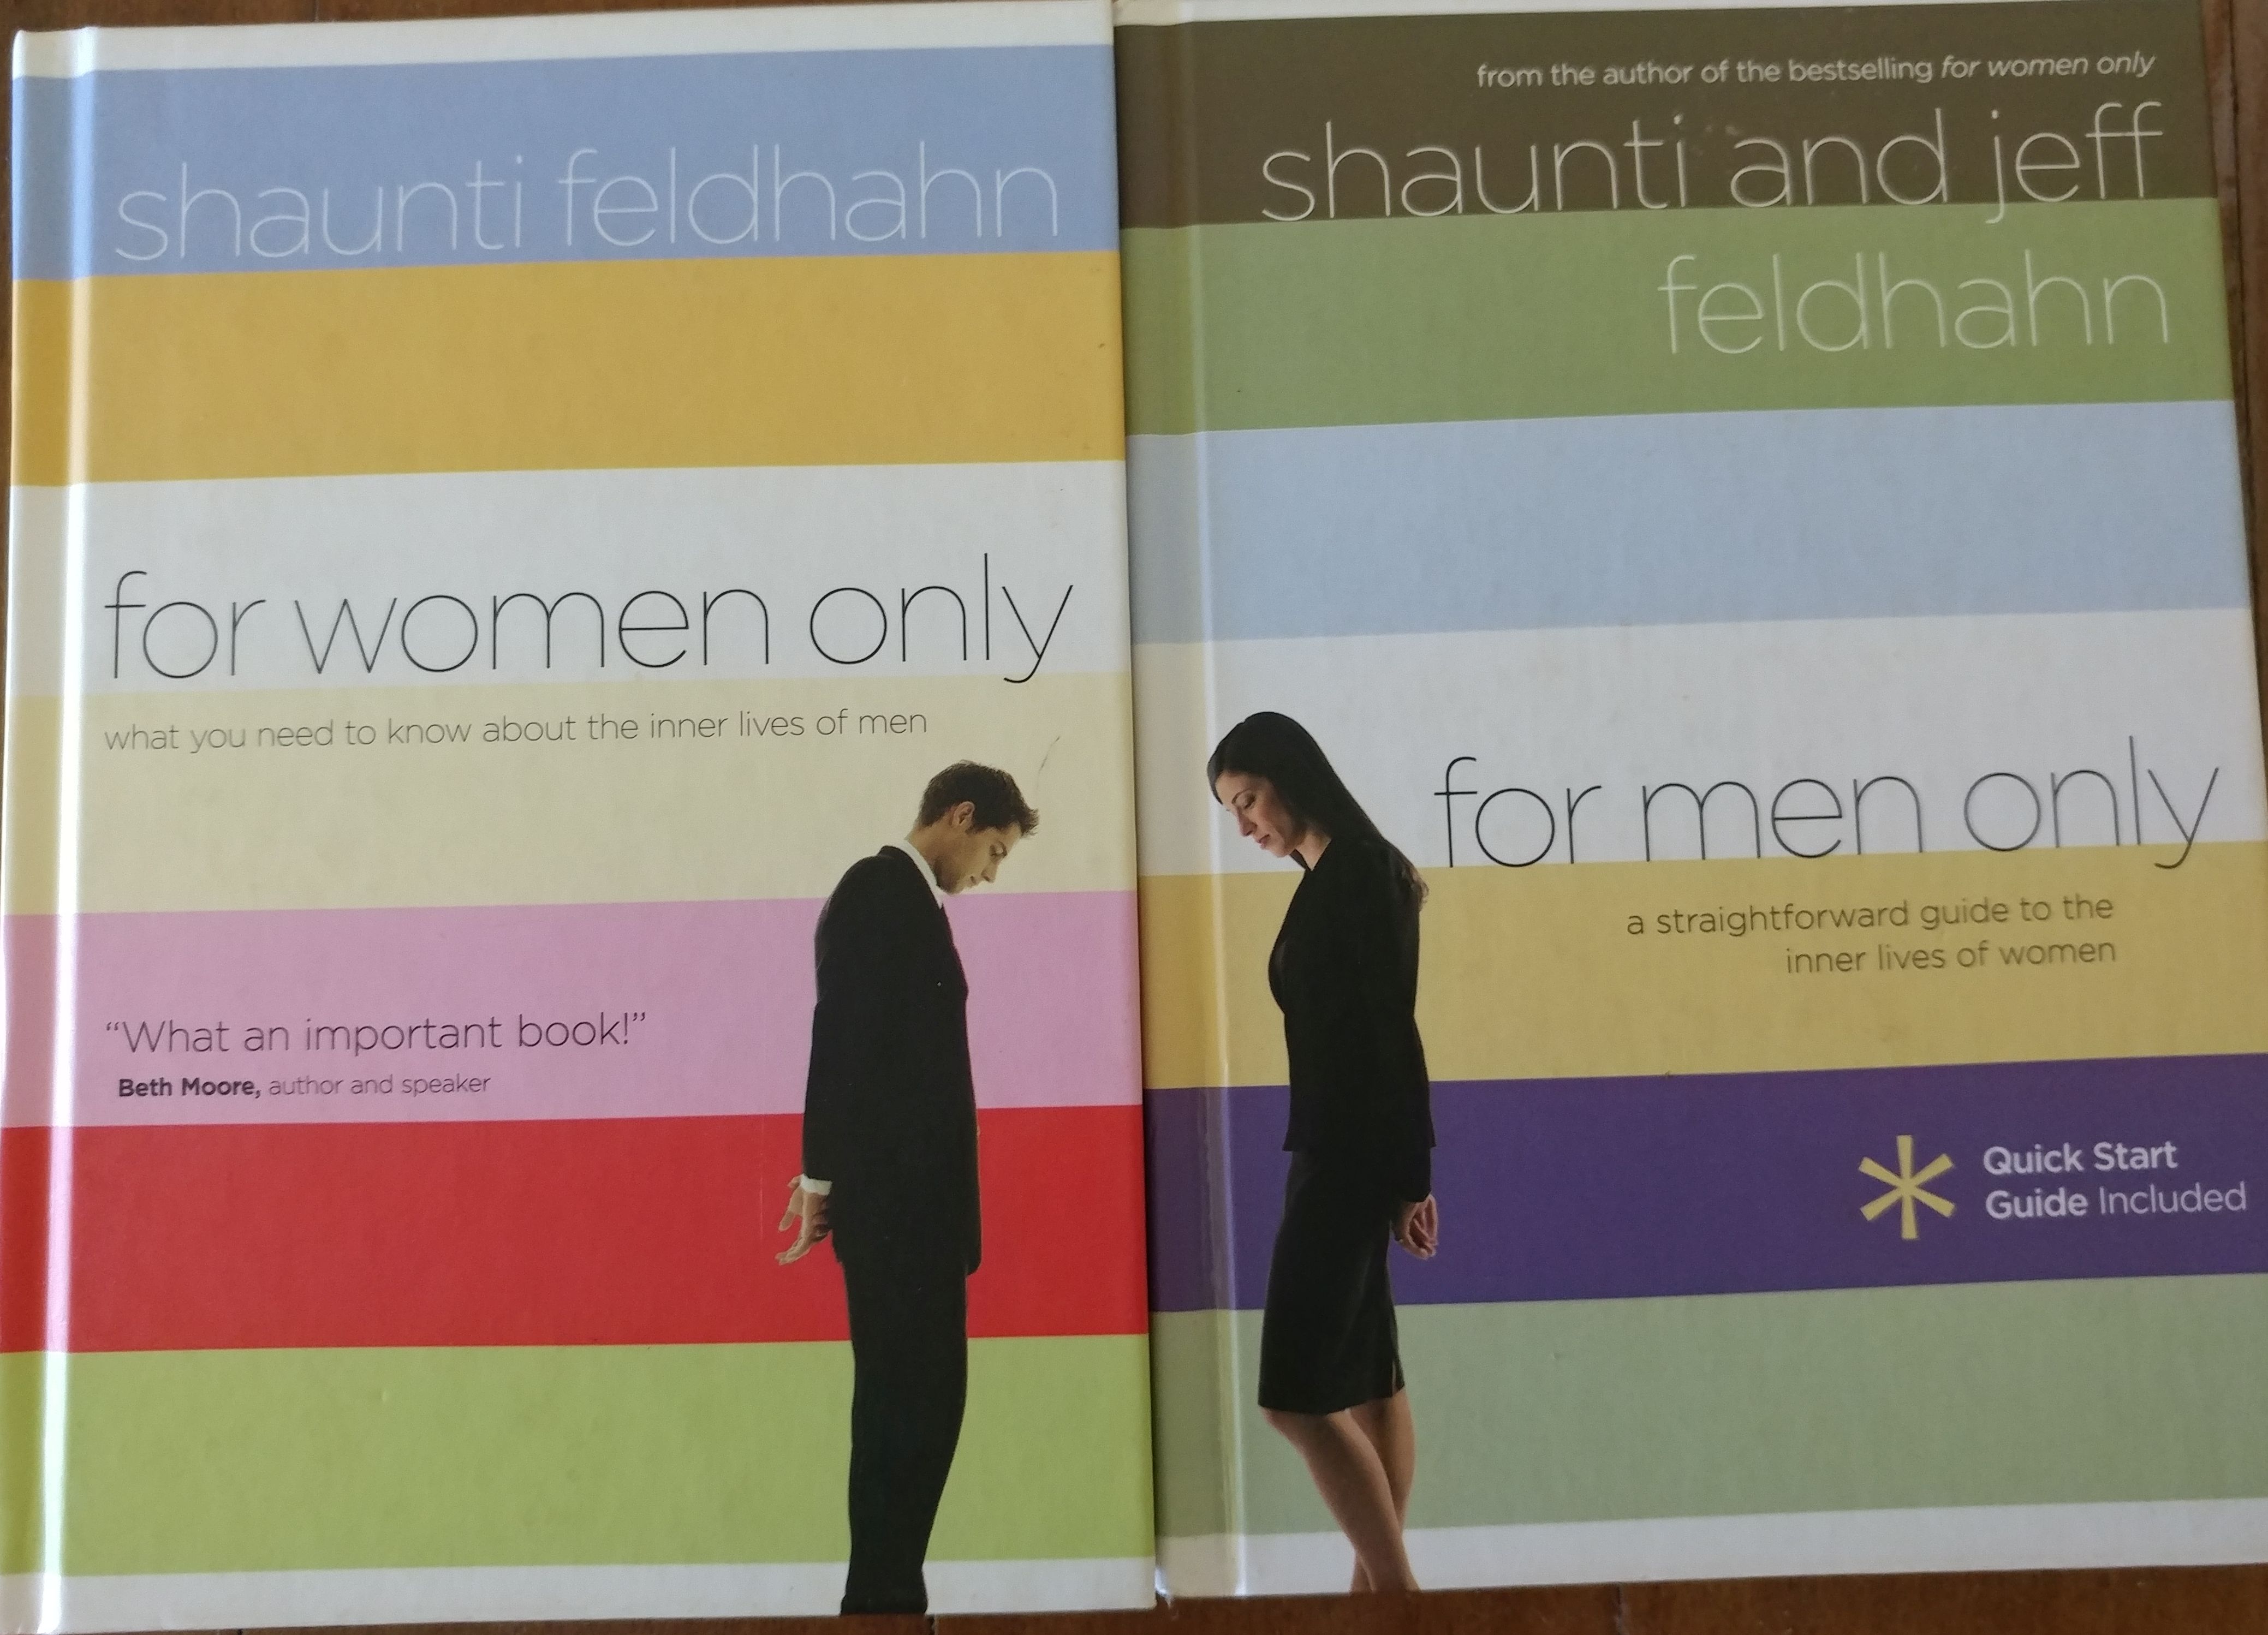 For Women Only by Shaunti Feldhahn and For Men Only by Shaunti & Jeff Feldhahn